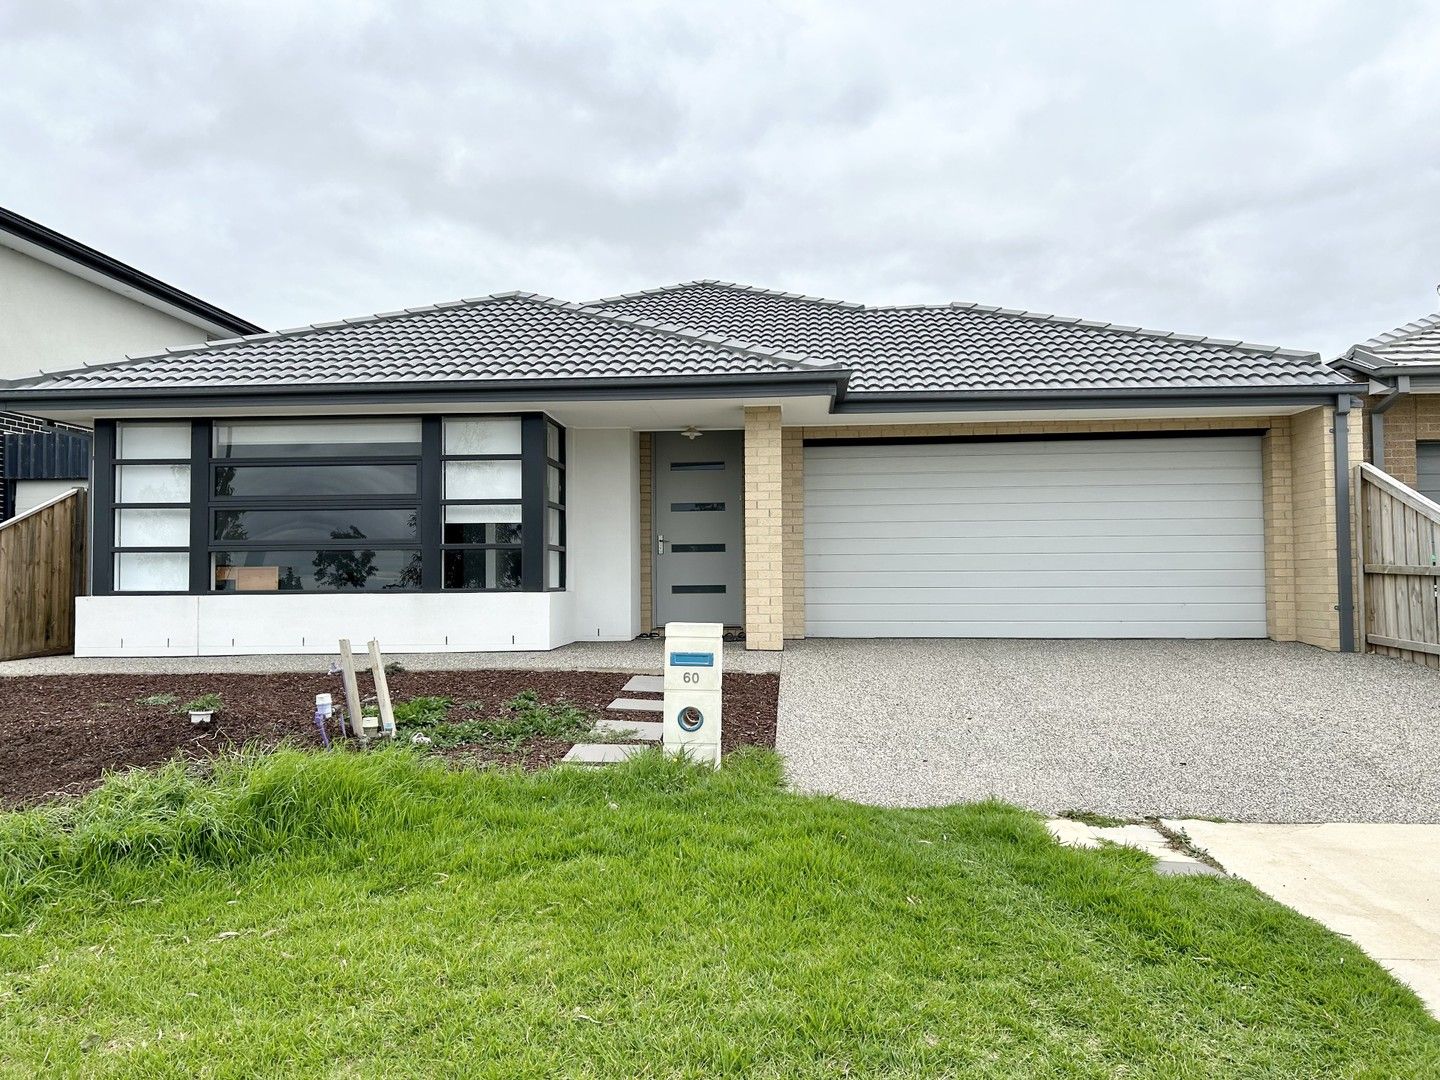 4 bedrooms House in 60 License Road DIGGERS REST VIC, 3427